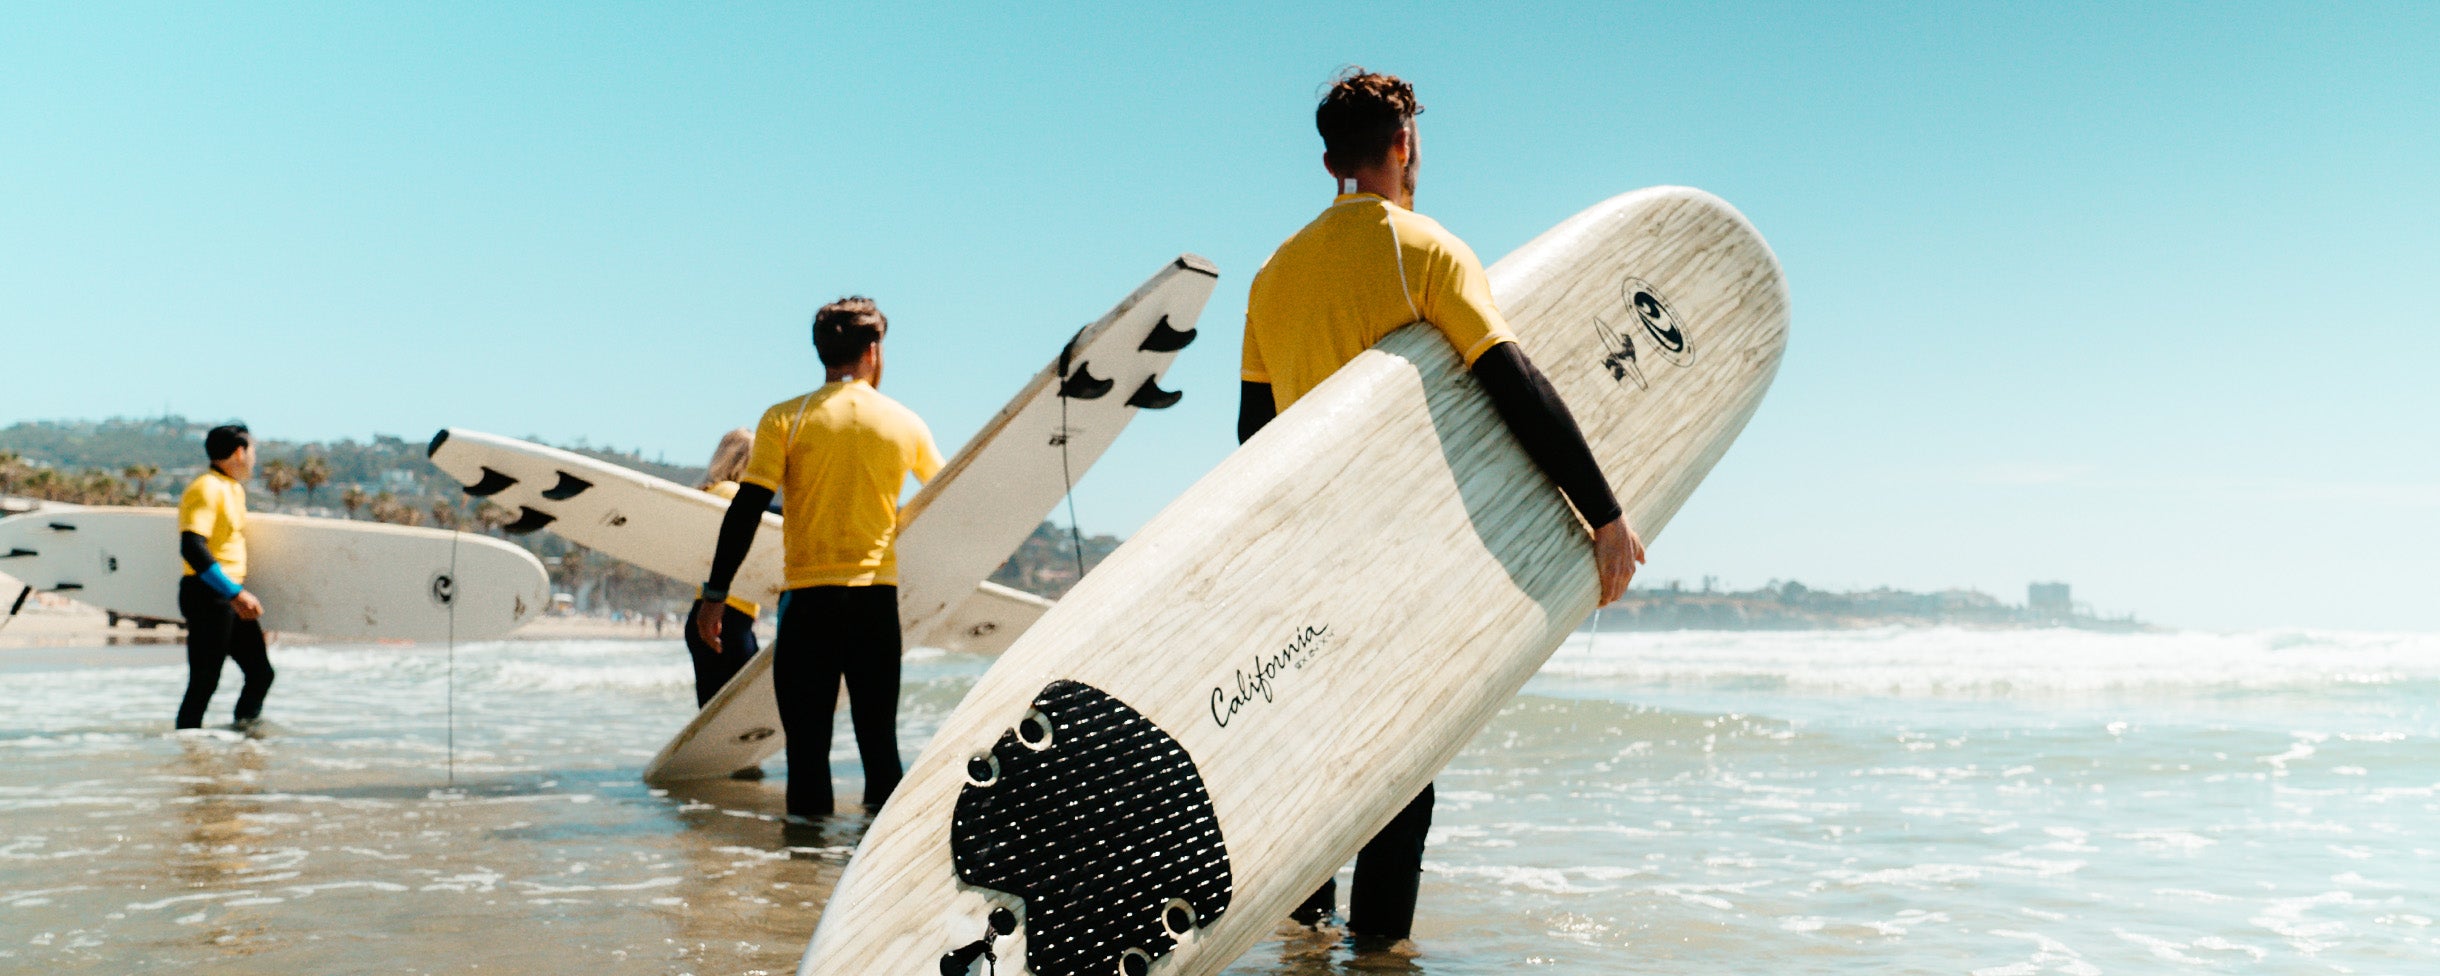 Rentals - Everyday California Surfboard Rentals. A group of surfers about to go out on a long board in San DIego, California